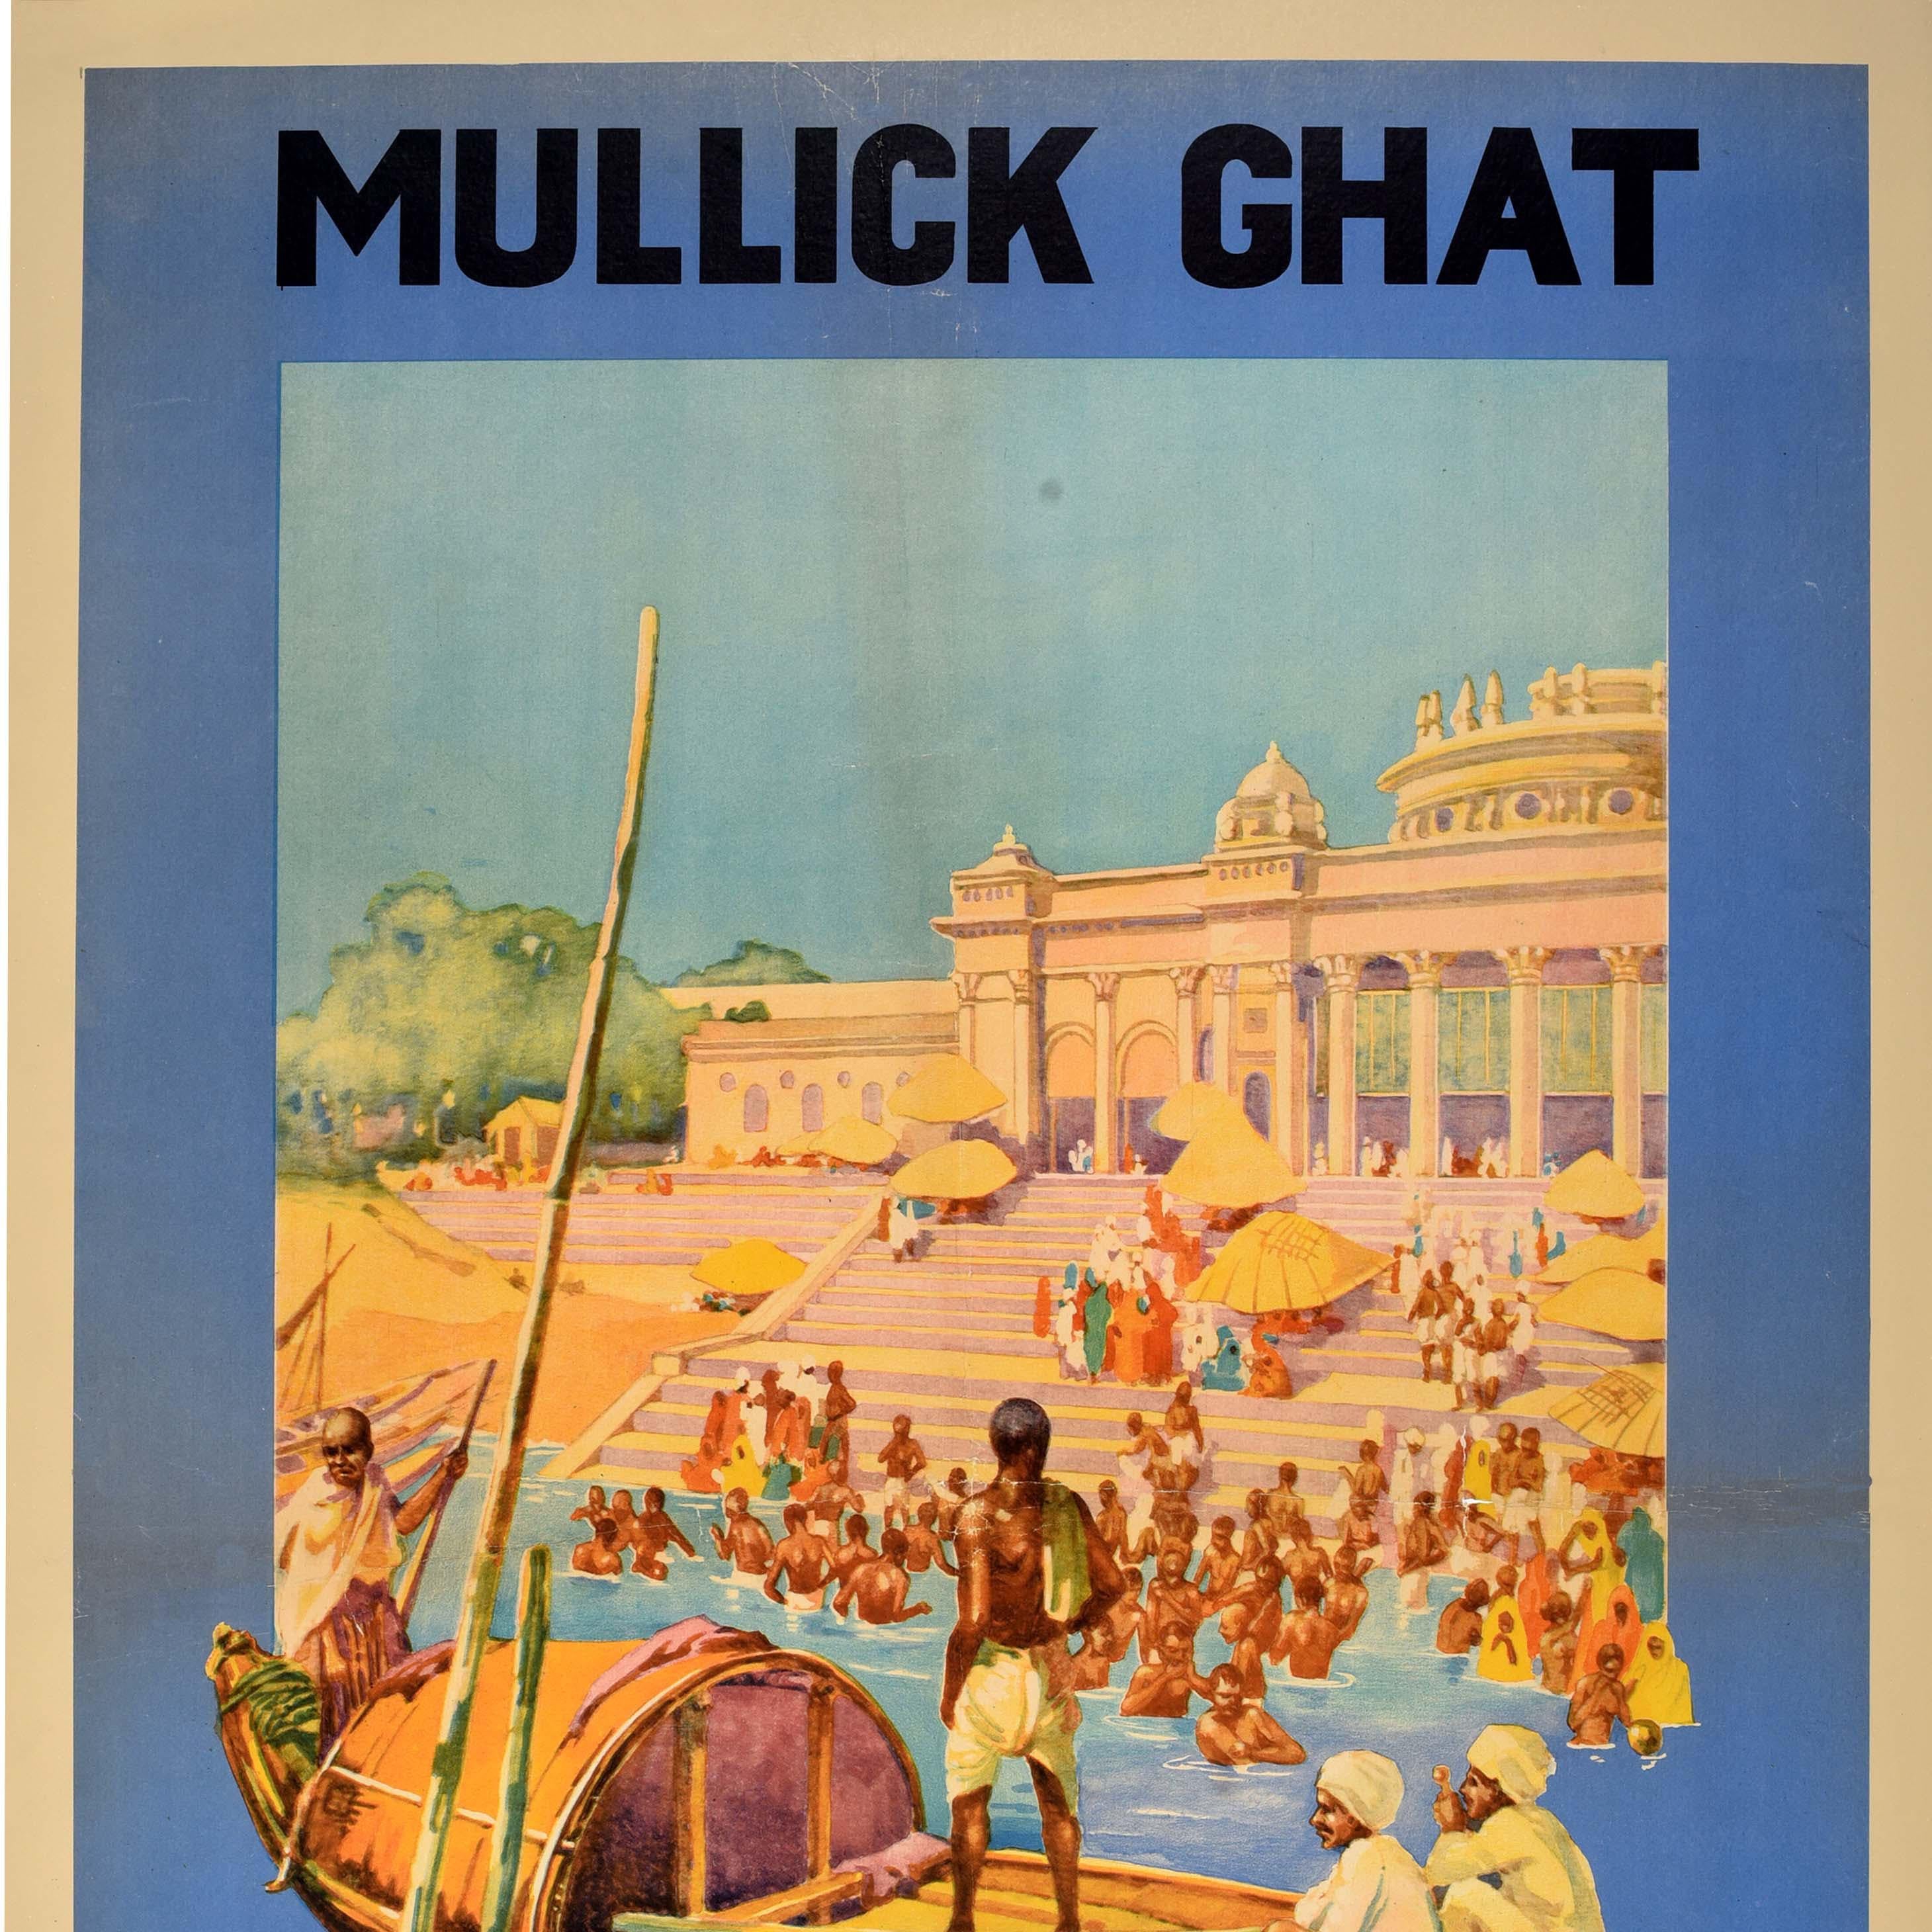 Original antique Asia travel poster for Mullick Ghat Calcutta / Kolkata in India featuring artwork by the British artist Dorothy Newsome (1900-1980) showing people, some families and children socialising and washing on the ghats, the steps leading